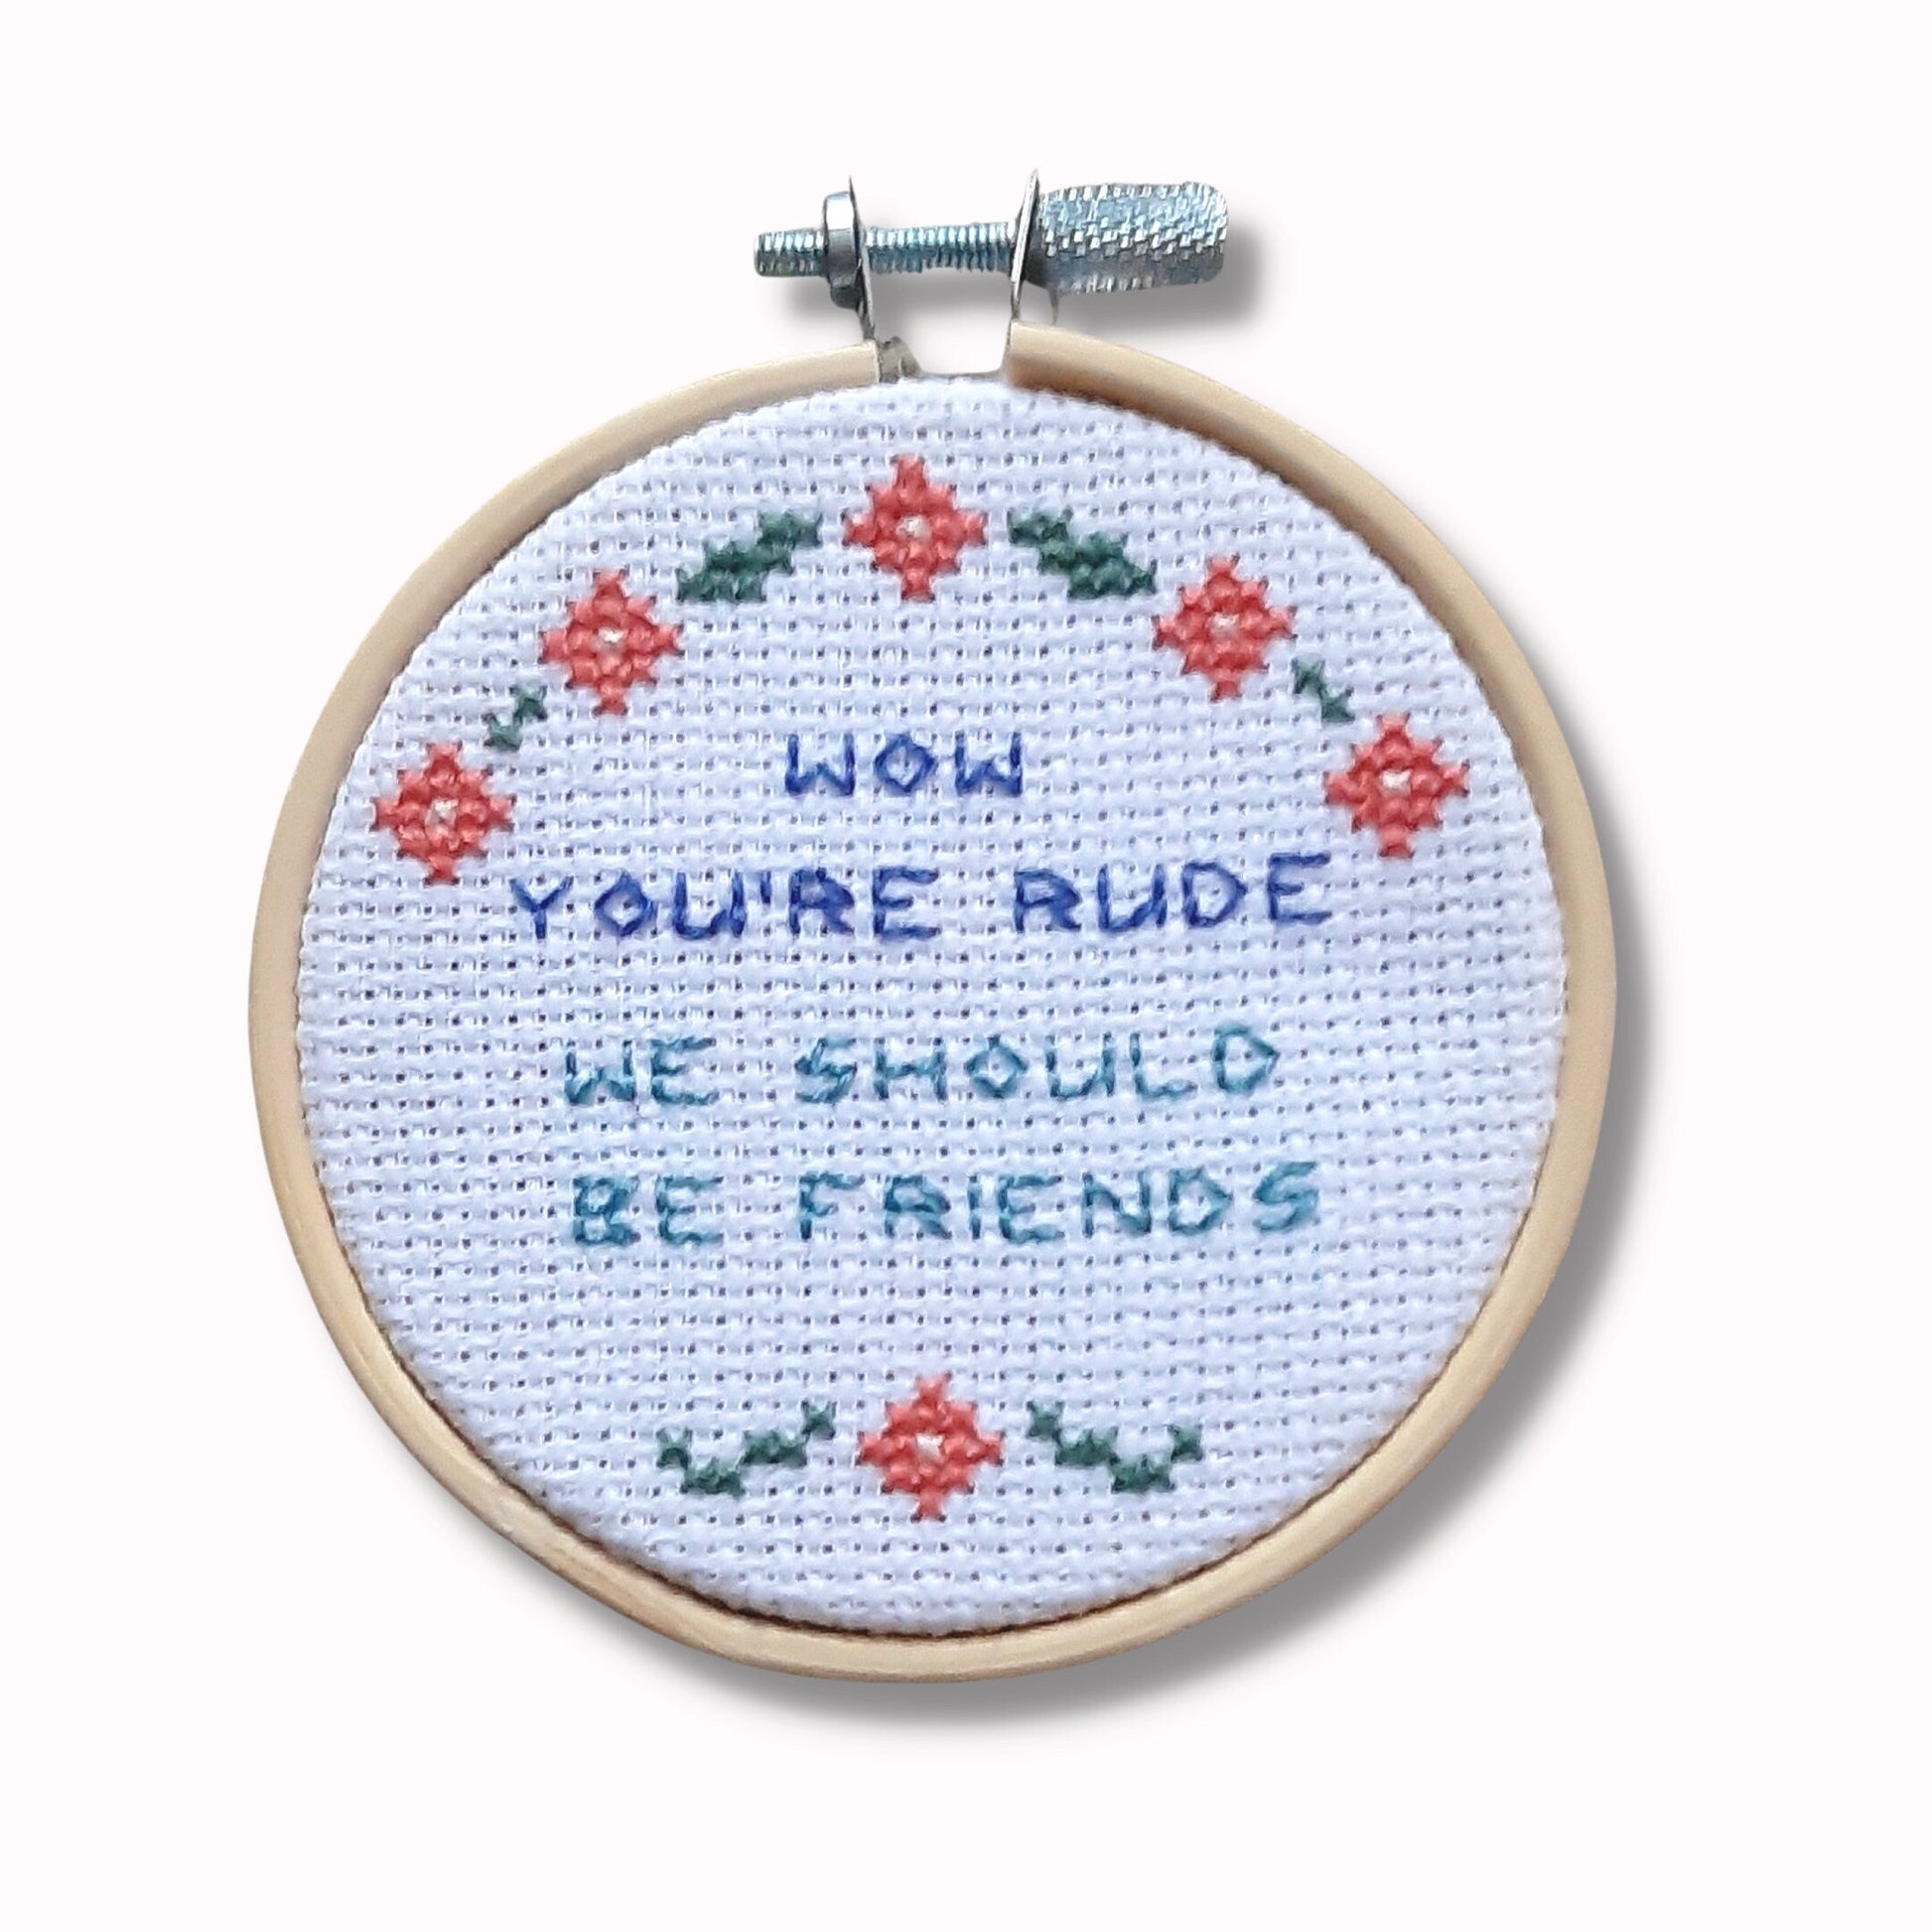 3 inch embroidery hoop by Thistleflat Crafts, with the wording 'Wow you're rude. We should be friends' with flowered border